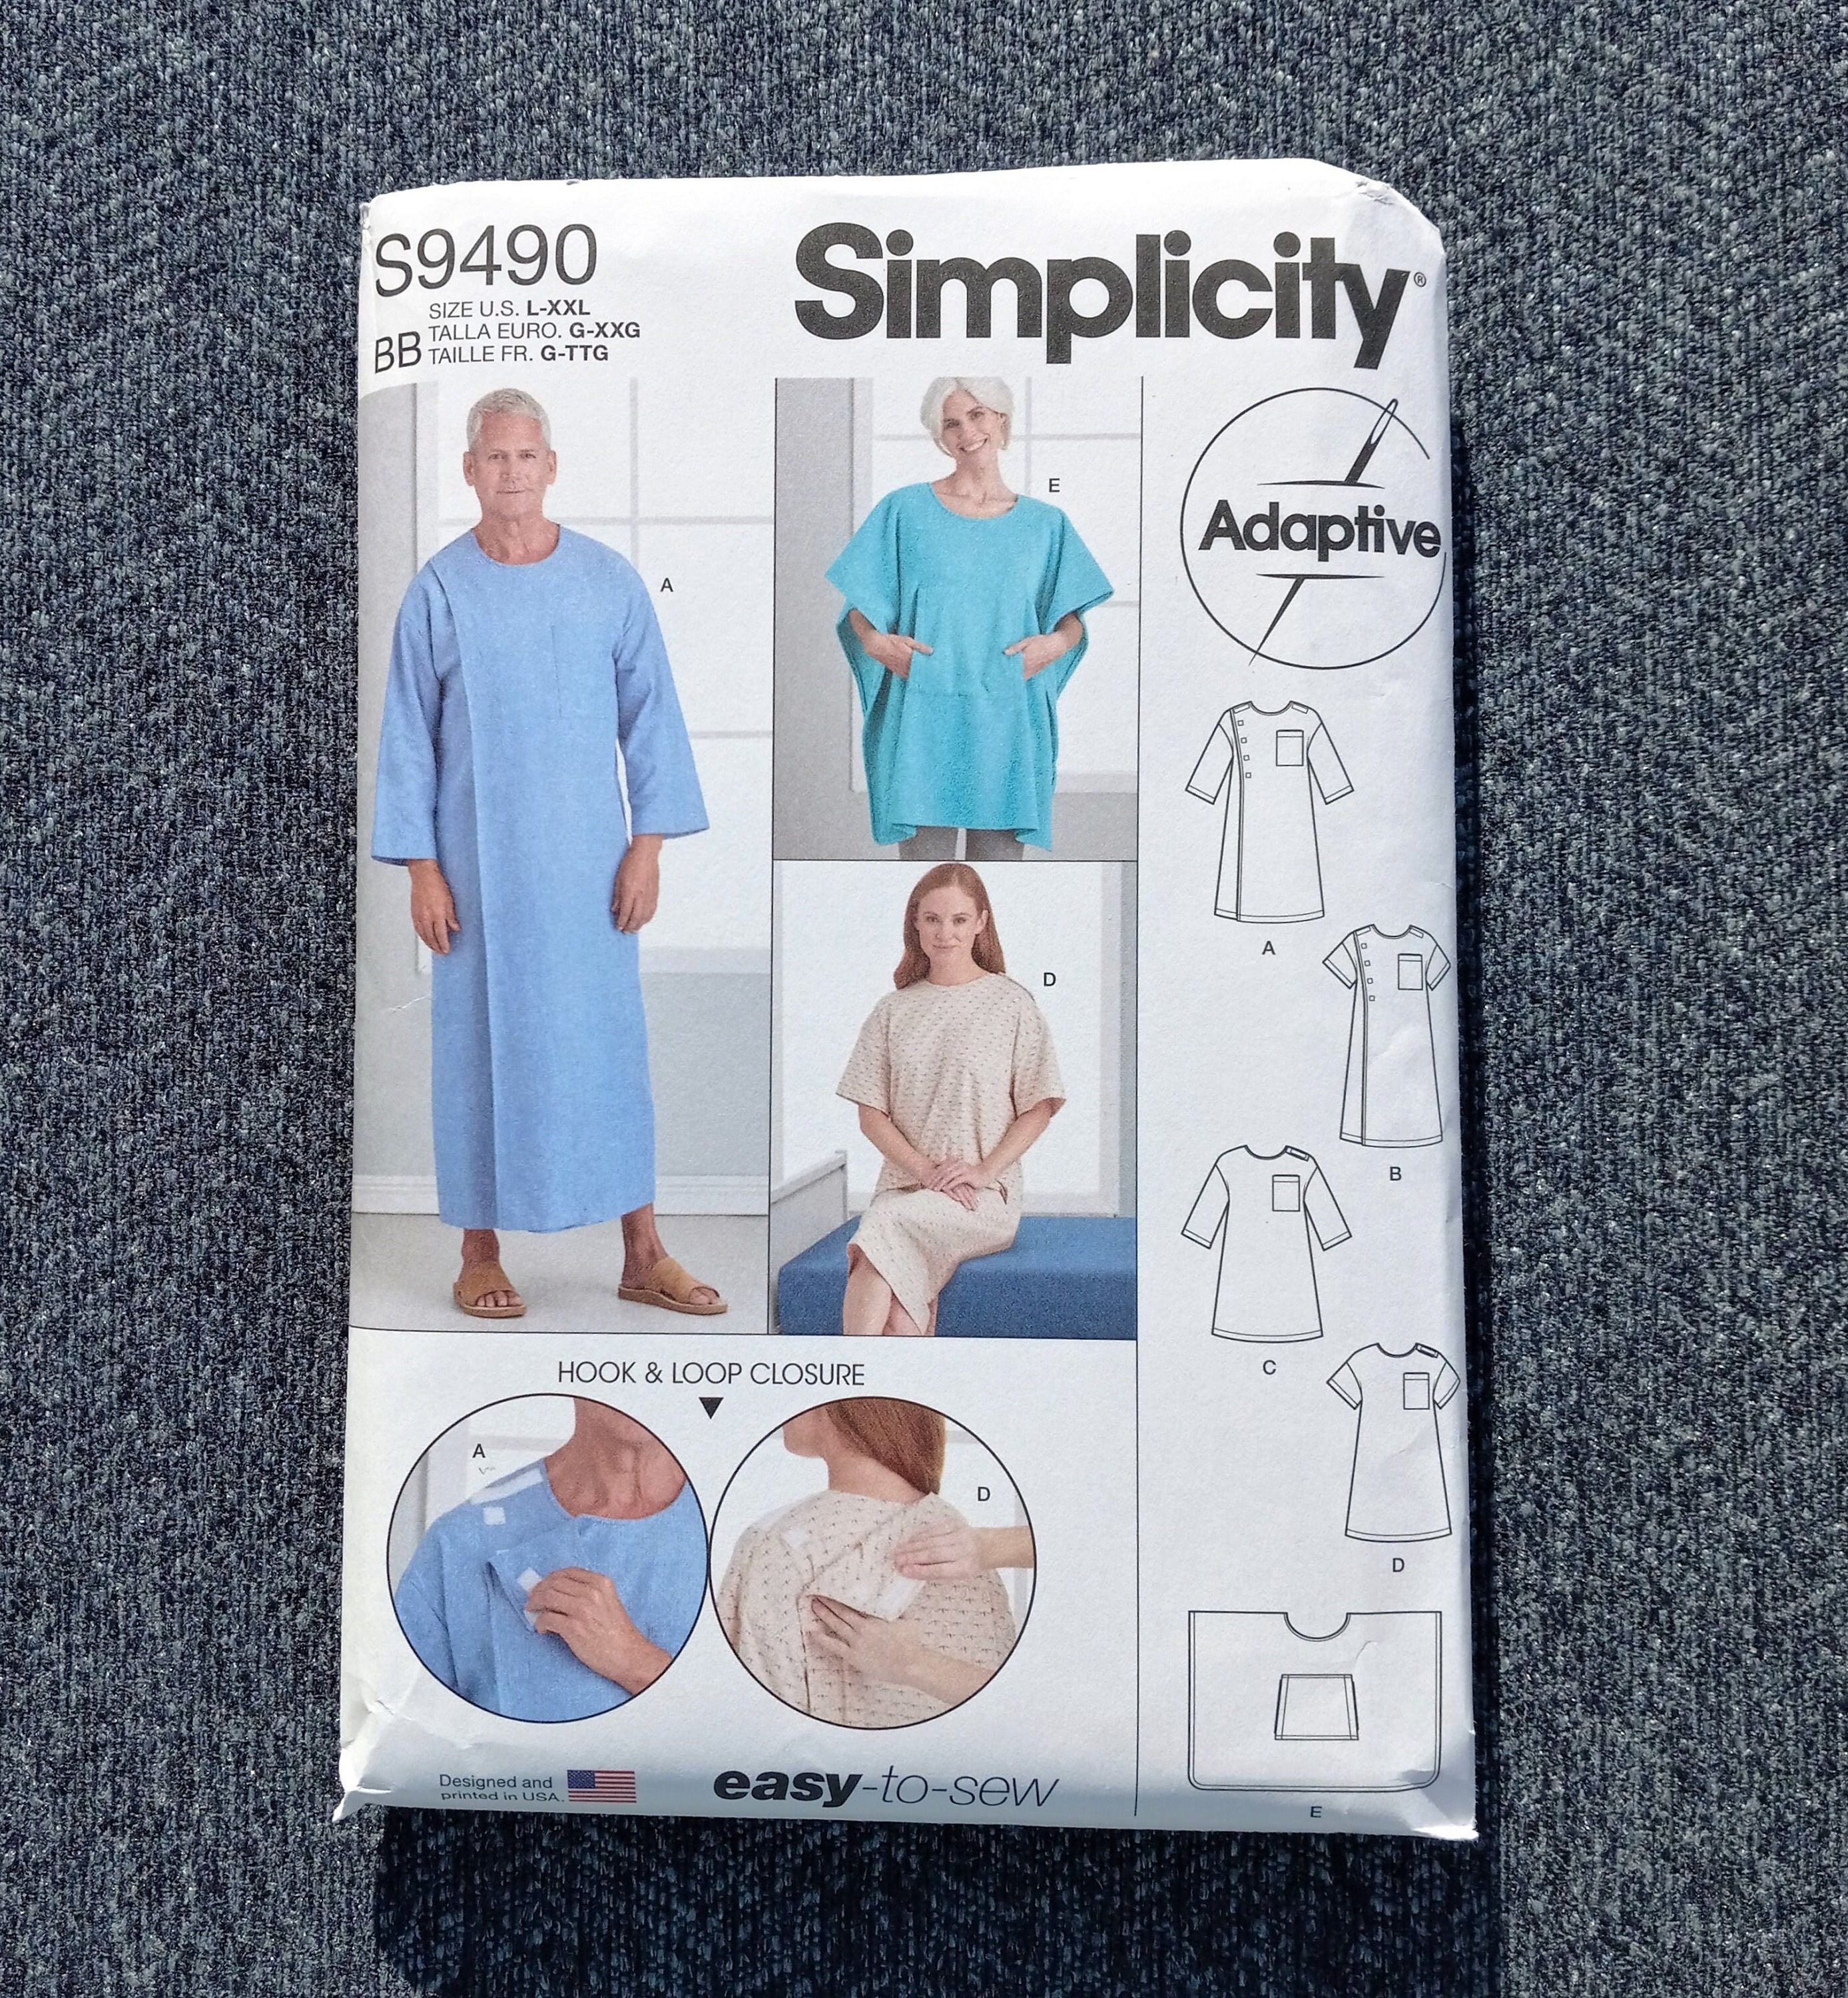 SMS Surgical Gown (Reinforced) with High Quality - Winner Medical